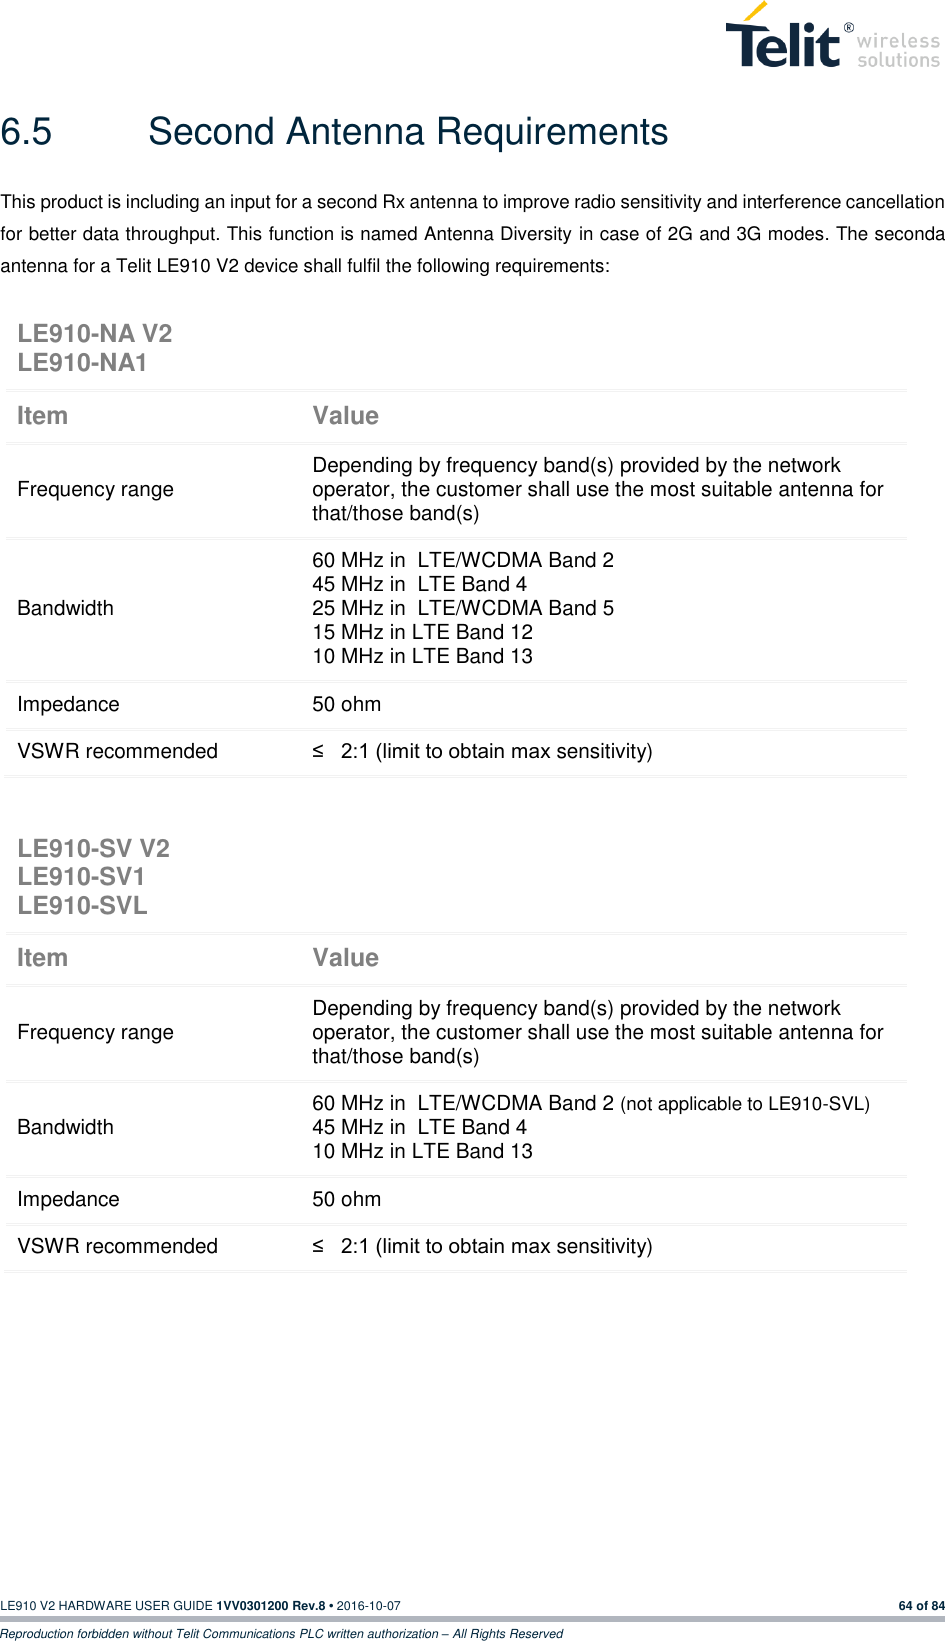   LE910 V2 HARDWARE USER GUIDE 1VV0301200 Rev.8 • 2016-10-07 64 of 84 Reproduction forbidden without Telit Communications PLC written authorization – All Rights Reserved 6.5  Second Antenna Requirements This product is including an input for a second Rx antenna to improve radio sensitivity and interference cancellation for better data throughput. This function is named Antenna Diversity in case of 2G and 3G modes. The seconda antenna for a Telit LE910 V2 device shall fulfil the following requirements:    LE910-NA V2 LE910-NA1  Item Value Frequency range Depending by frequency band(s) provided by the network operator, the customer shall use the most suitable antenna for that/those band(s) Bandwidth 60 MHz in  LTE/WCDMA Band 2 45 MHz in  LTE Band 4 25 MHz in  LTE/WCDMA Band 5 15 MHz in LTE Band 12 10 MHz in LTE Band 13 Impedance 50 ohm VSWR recommended ≤   2:1 (limit to obtain max sensitivity) LE910-SV V2 LE910-SV1 LE910-SVL  Item Value Frequency range Depending by frequency band(s) provided by the network operator, the customer shall use the most suitable antenna for that/those band(s) Bandwidth 60 MHz in  LTE/WCDMA Band 2 (not applicable to LE910-SVL) 45 MHz in  LTE Band 4 10 MHz in LTE Band 13 Impedance 50 ohm VSWR recommended ≤   2:1 (limit to obtain max sensitivity) 